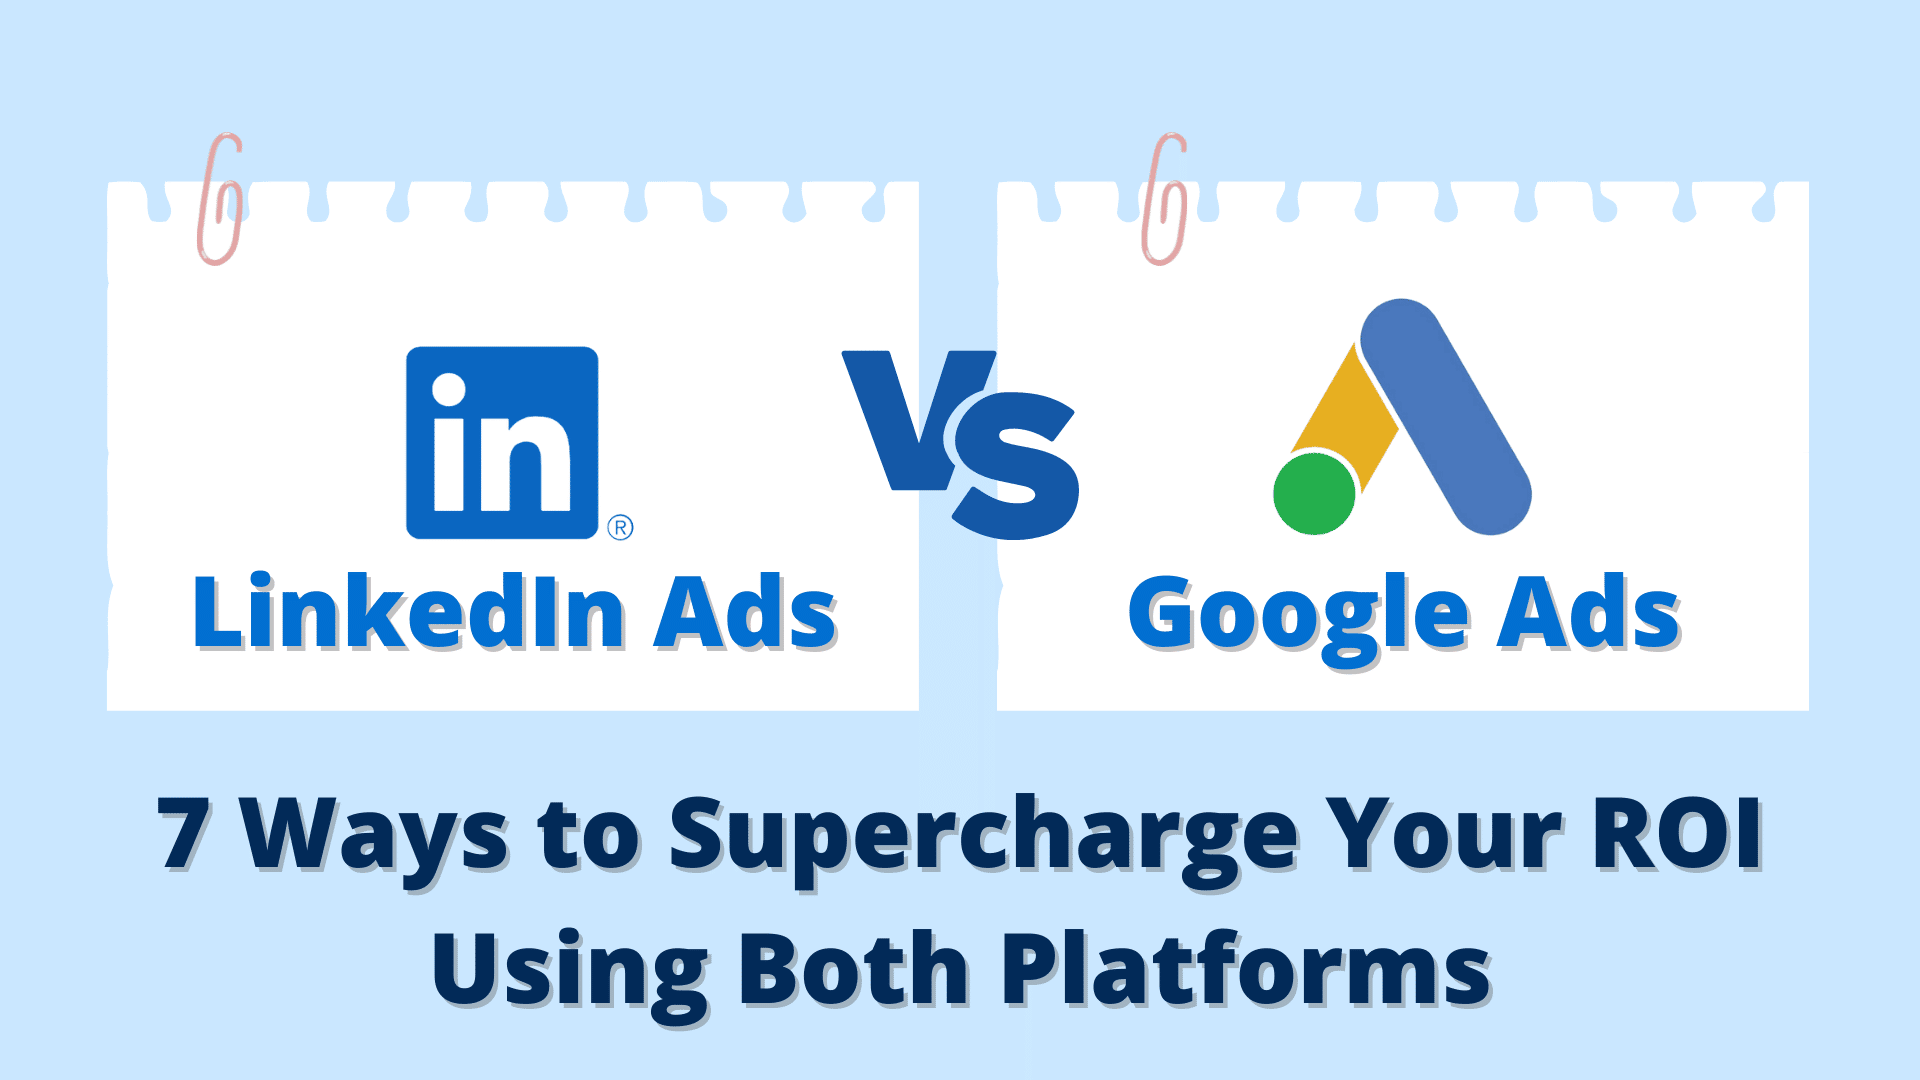 LinkedIn Ads vs Google Ads 7 Ways to Supercharge Your ROI